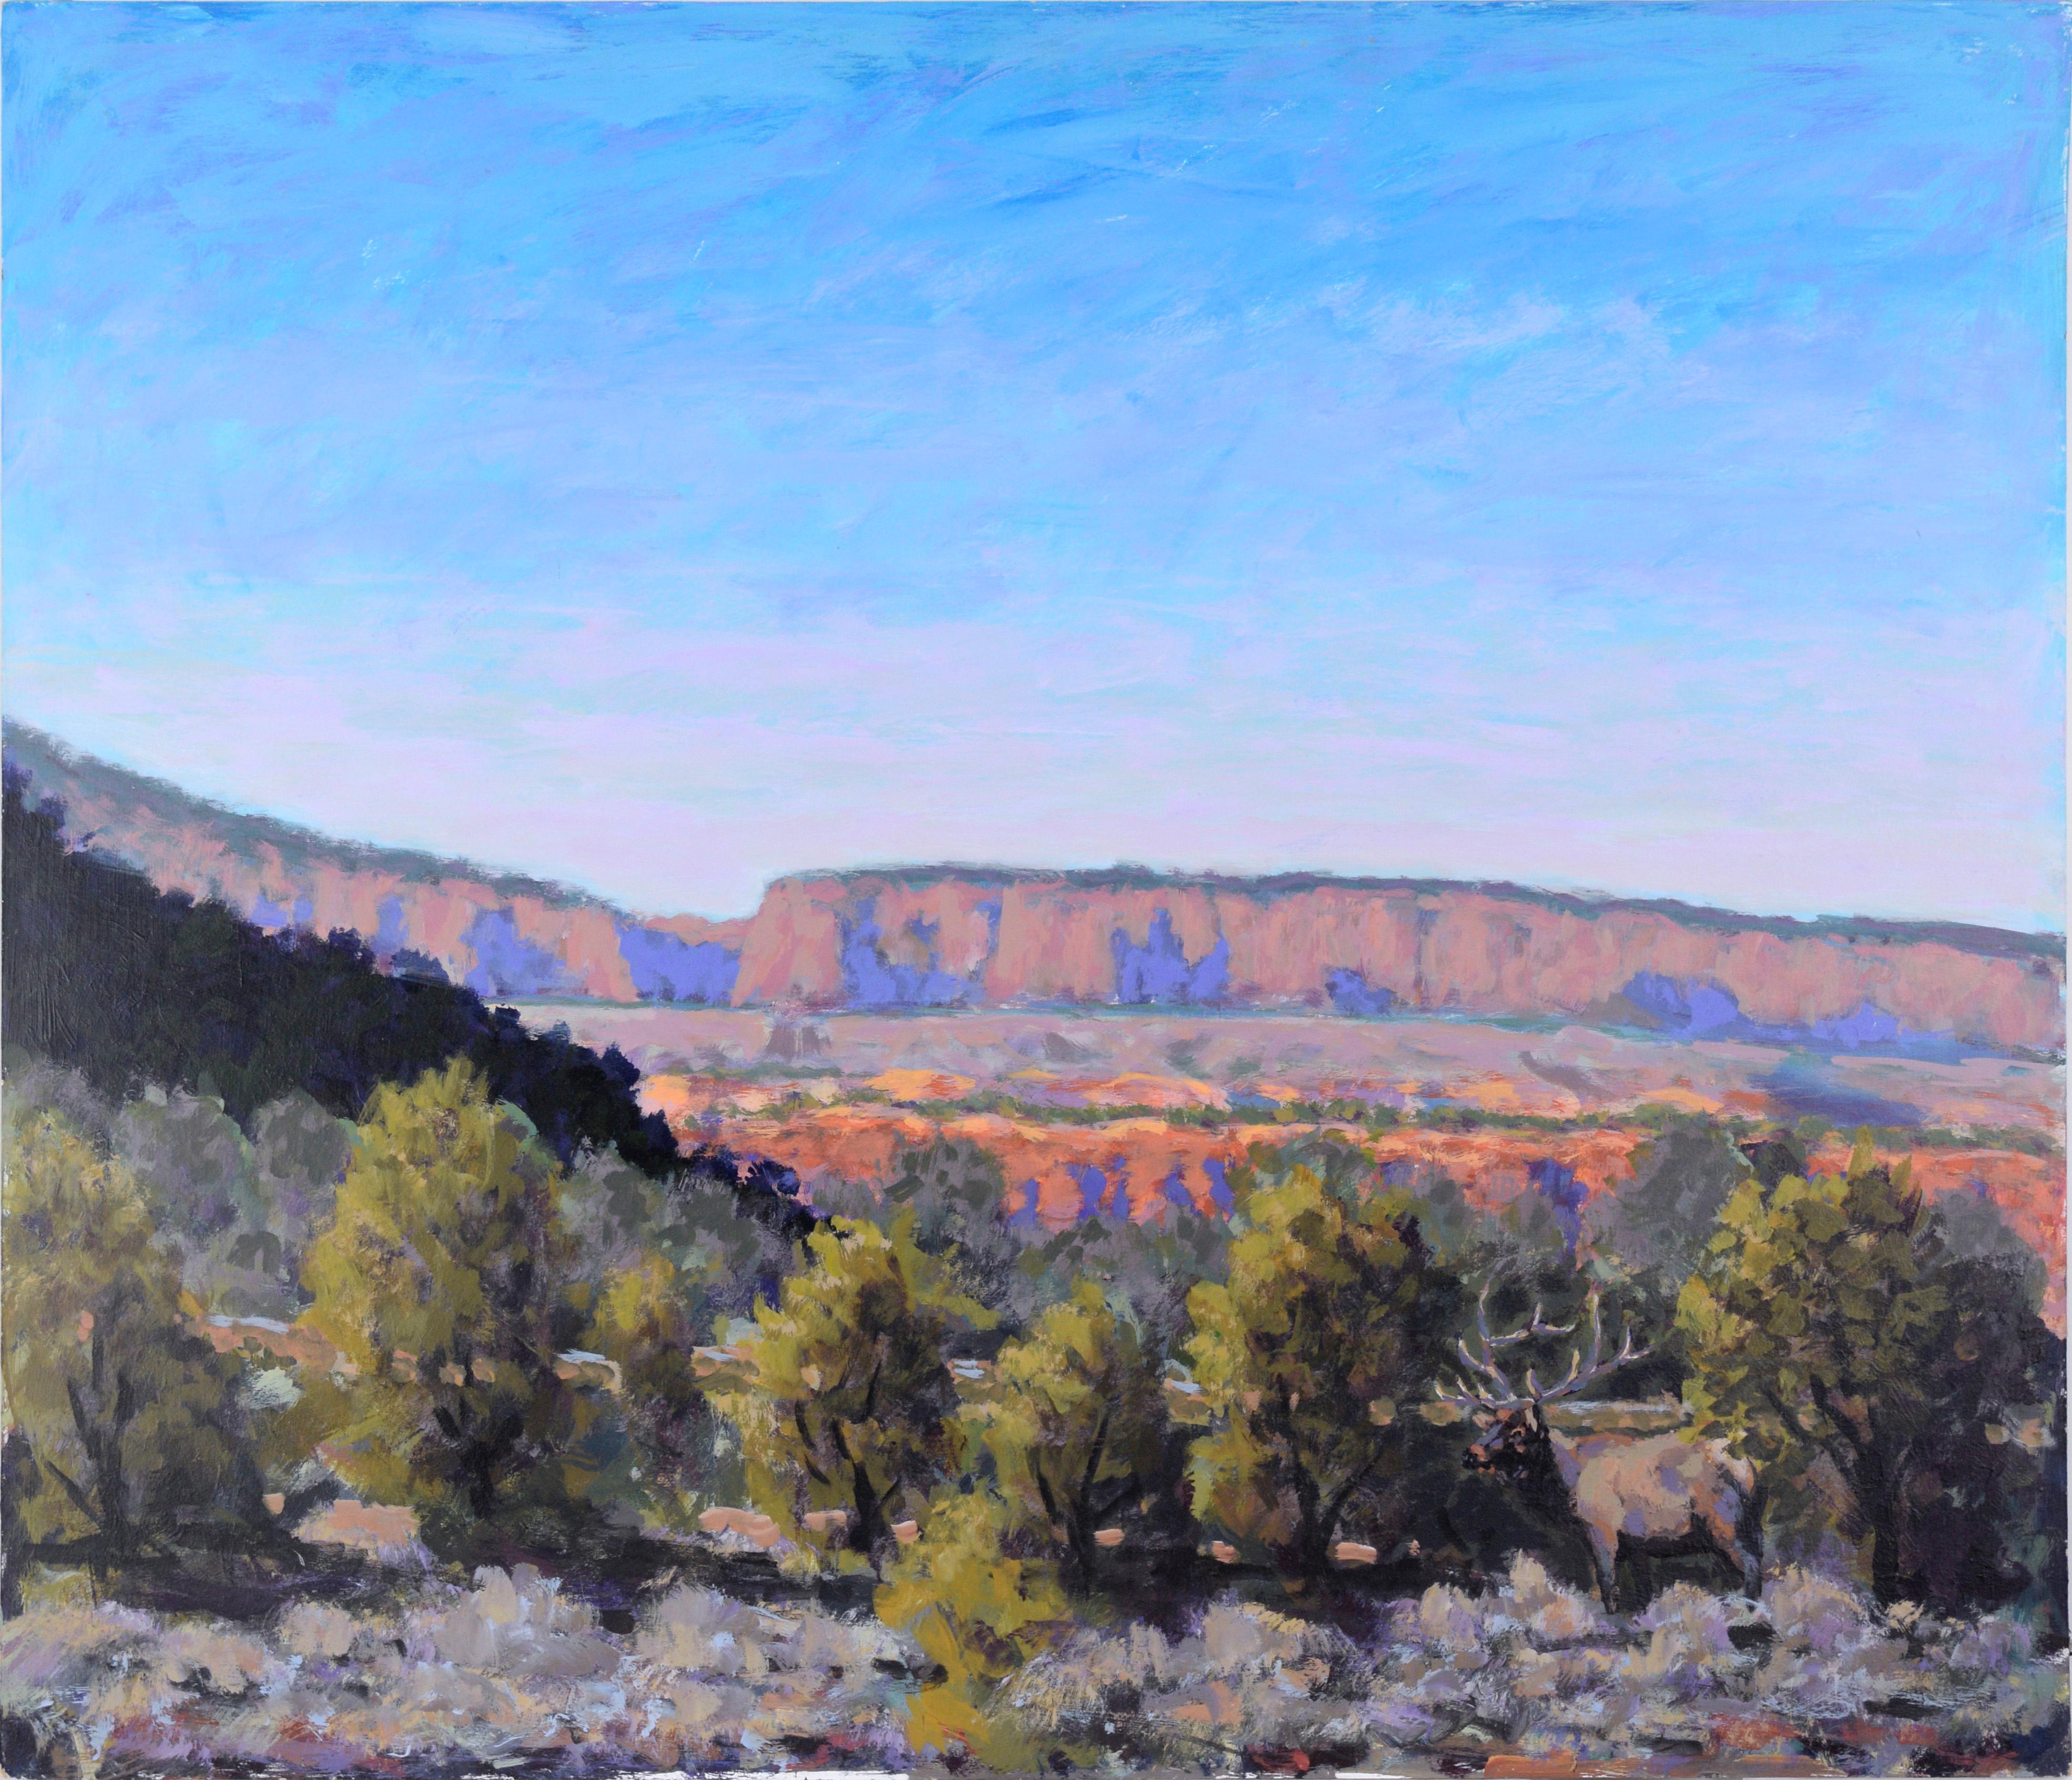 Nick White Animal Painting - Red Cliffs in the Desert - Western Plein Aire Landscape in Acrylic on Board